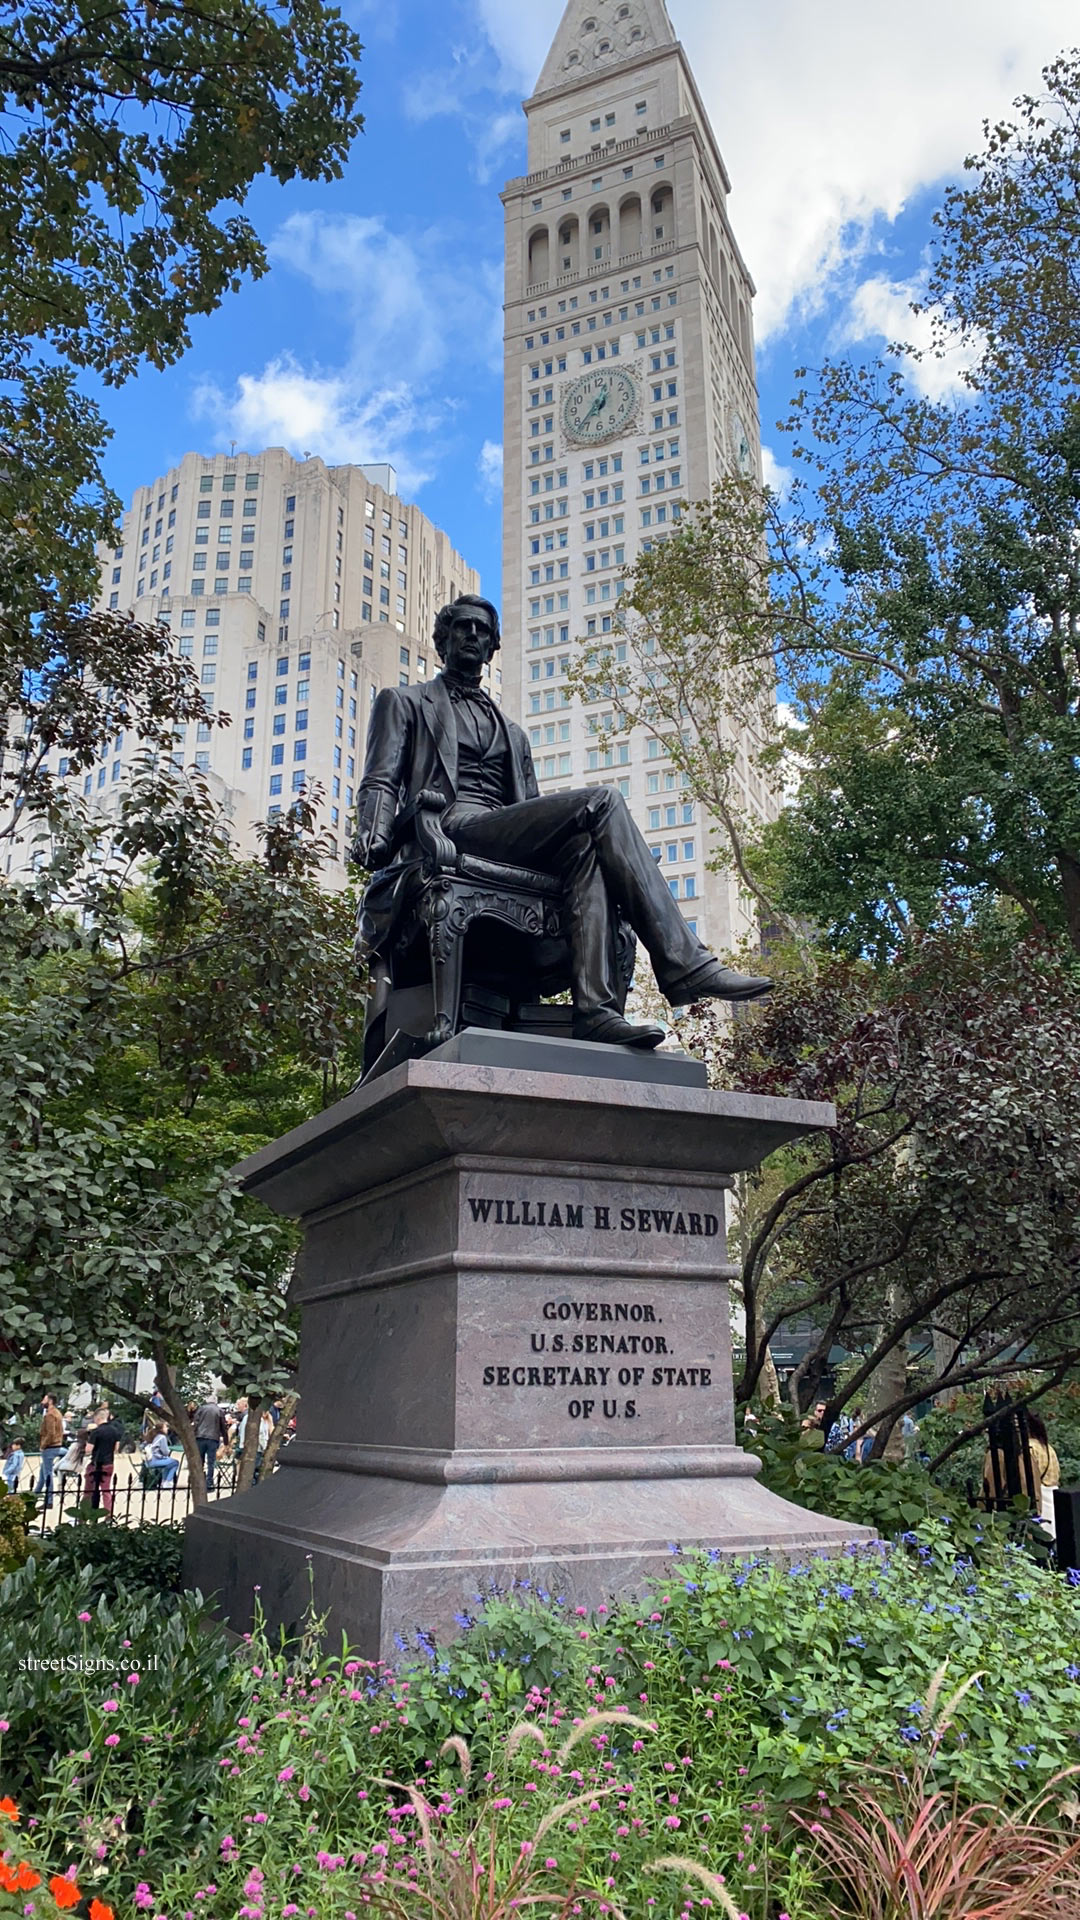 New York - A monument in memory of William Seward - E 23 St/Broadway, New York, NY 10010, USA